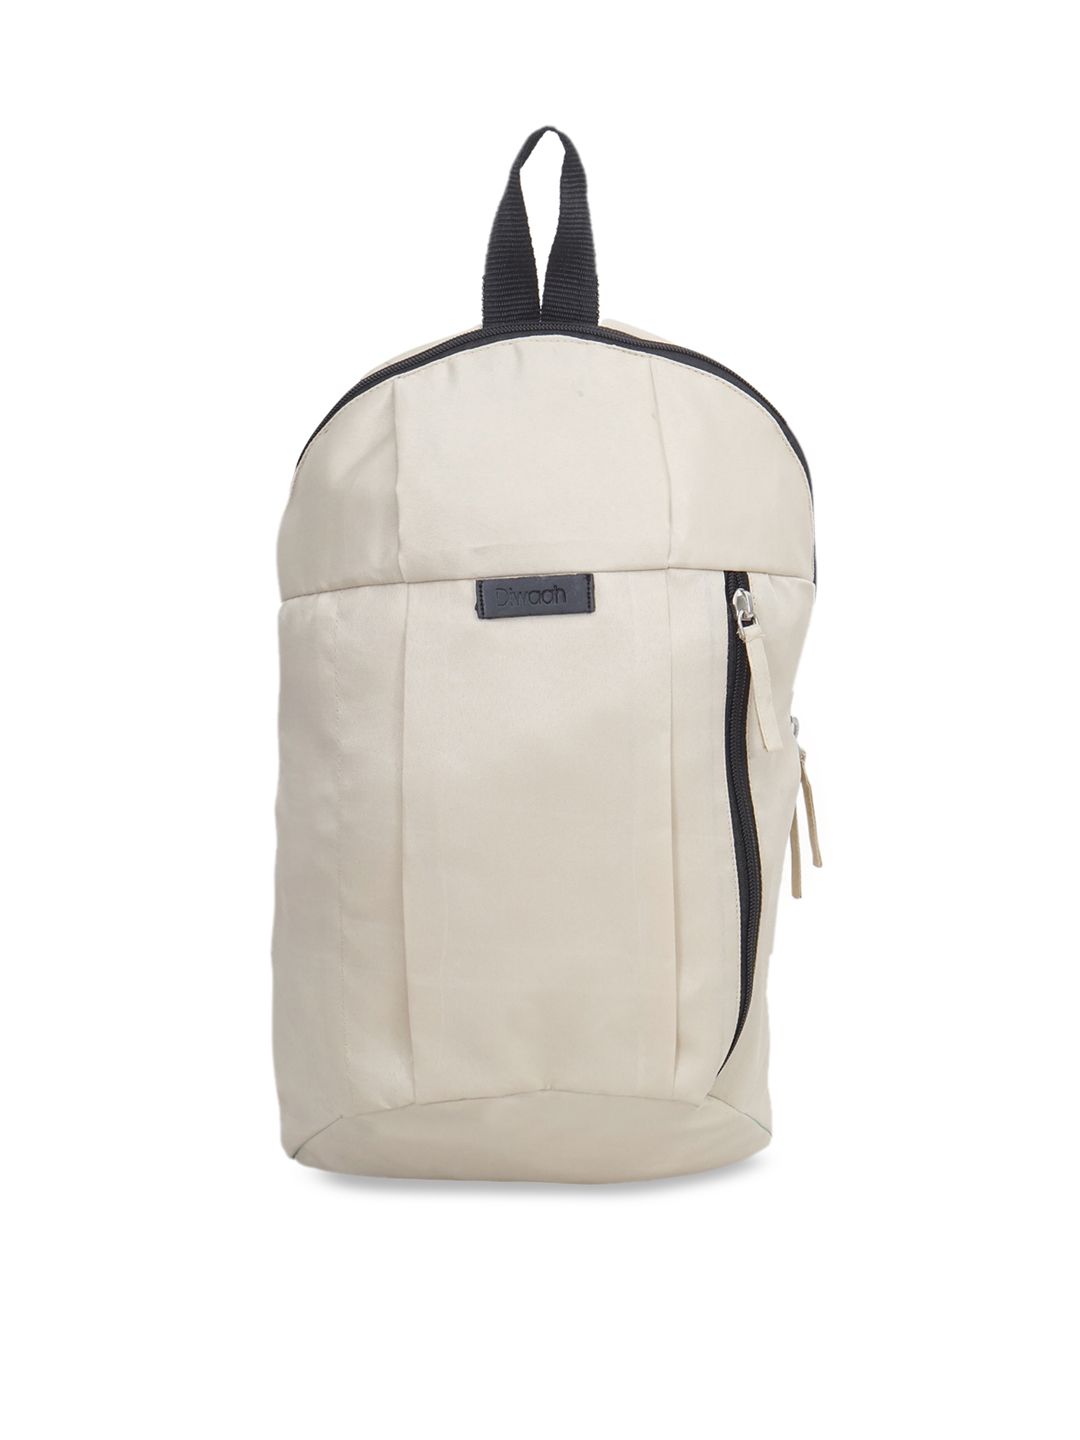 Diwaah Unisex Cream-Coloured Solid Backpack Price in India